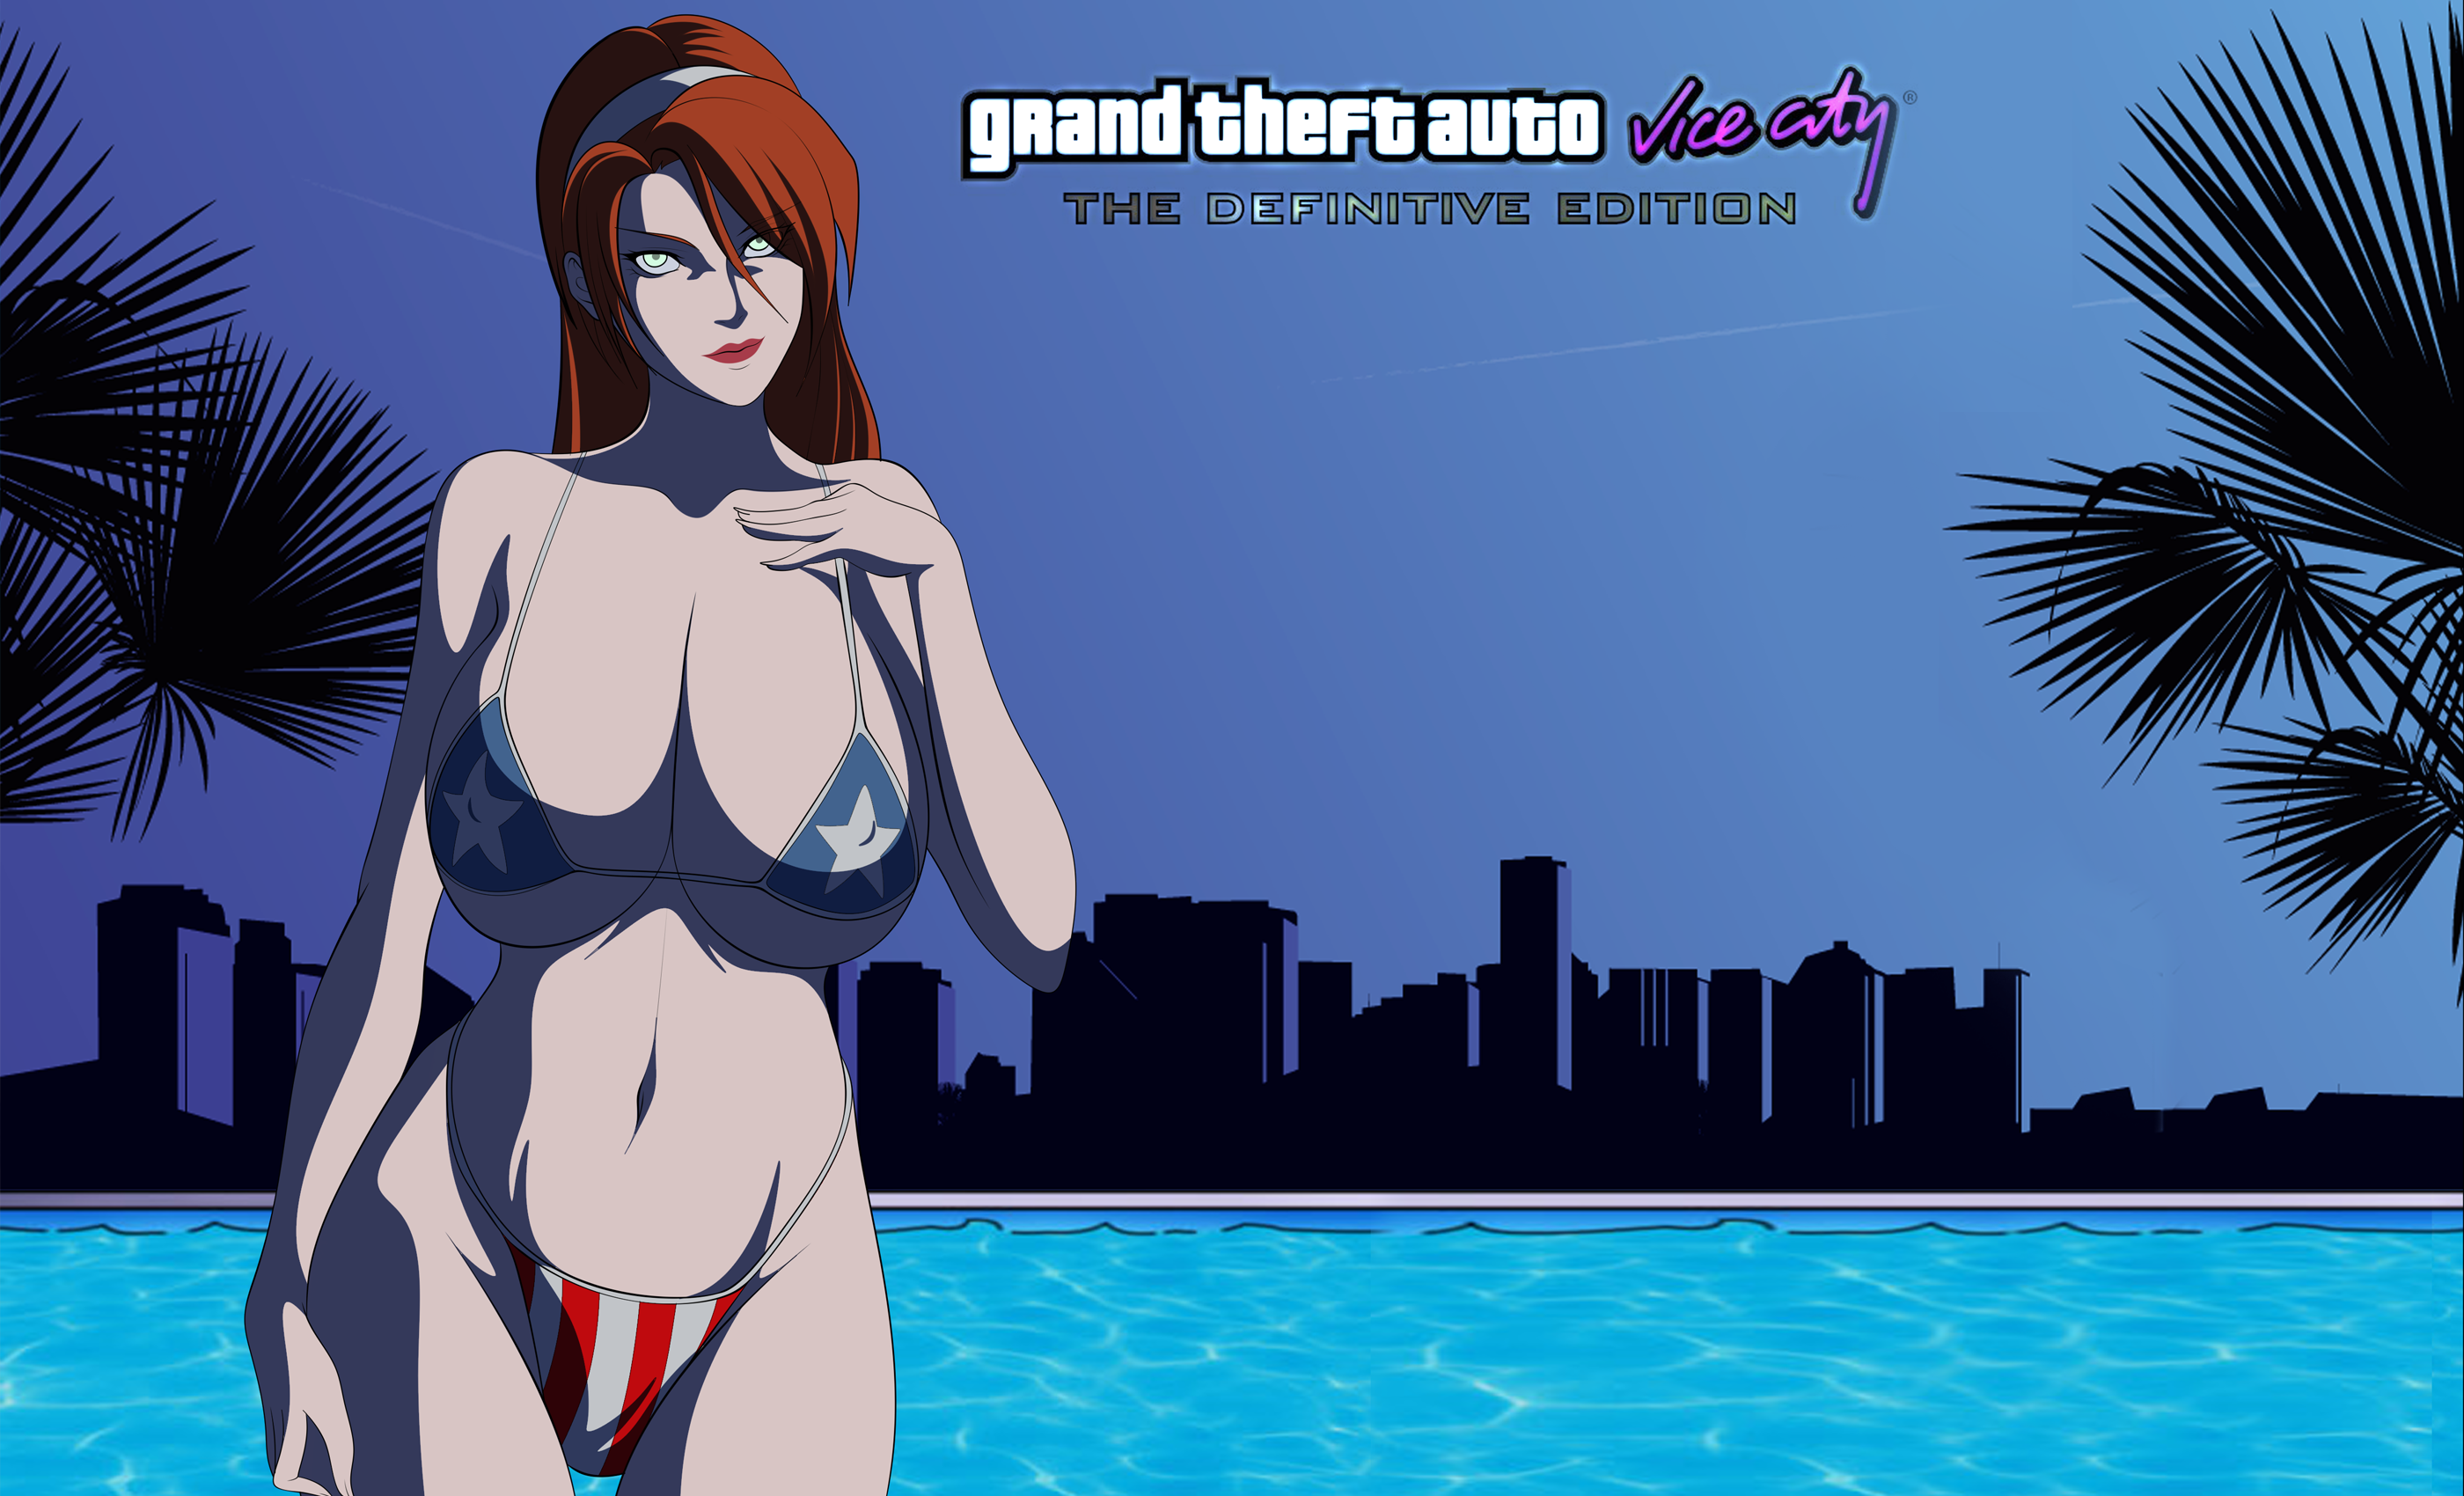 candy suxxx, miami, grand theft auto, rockstar games, pool party, 80s, actr...